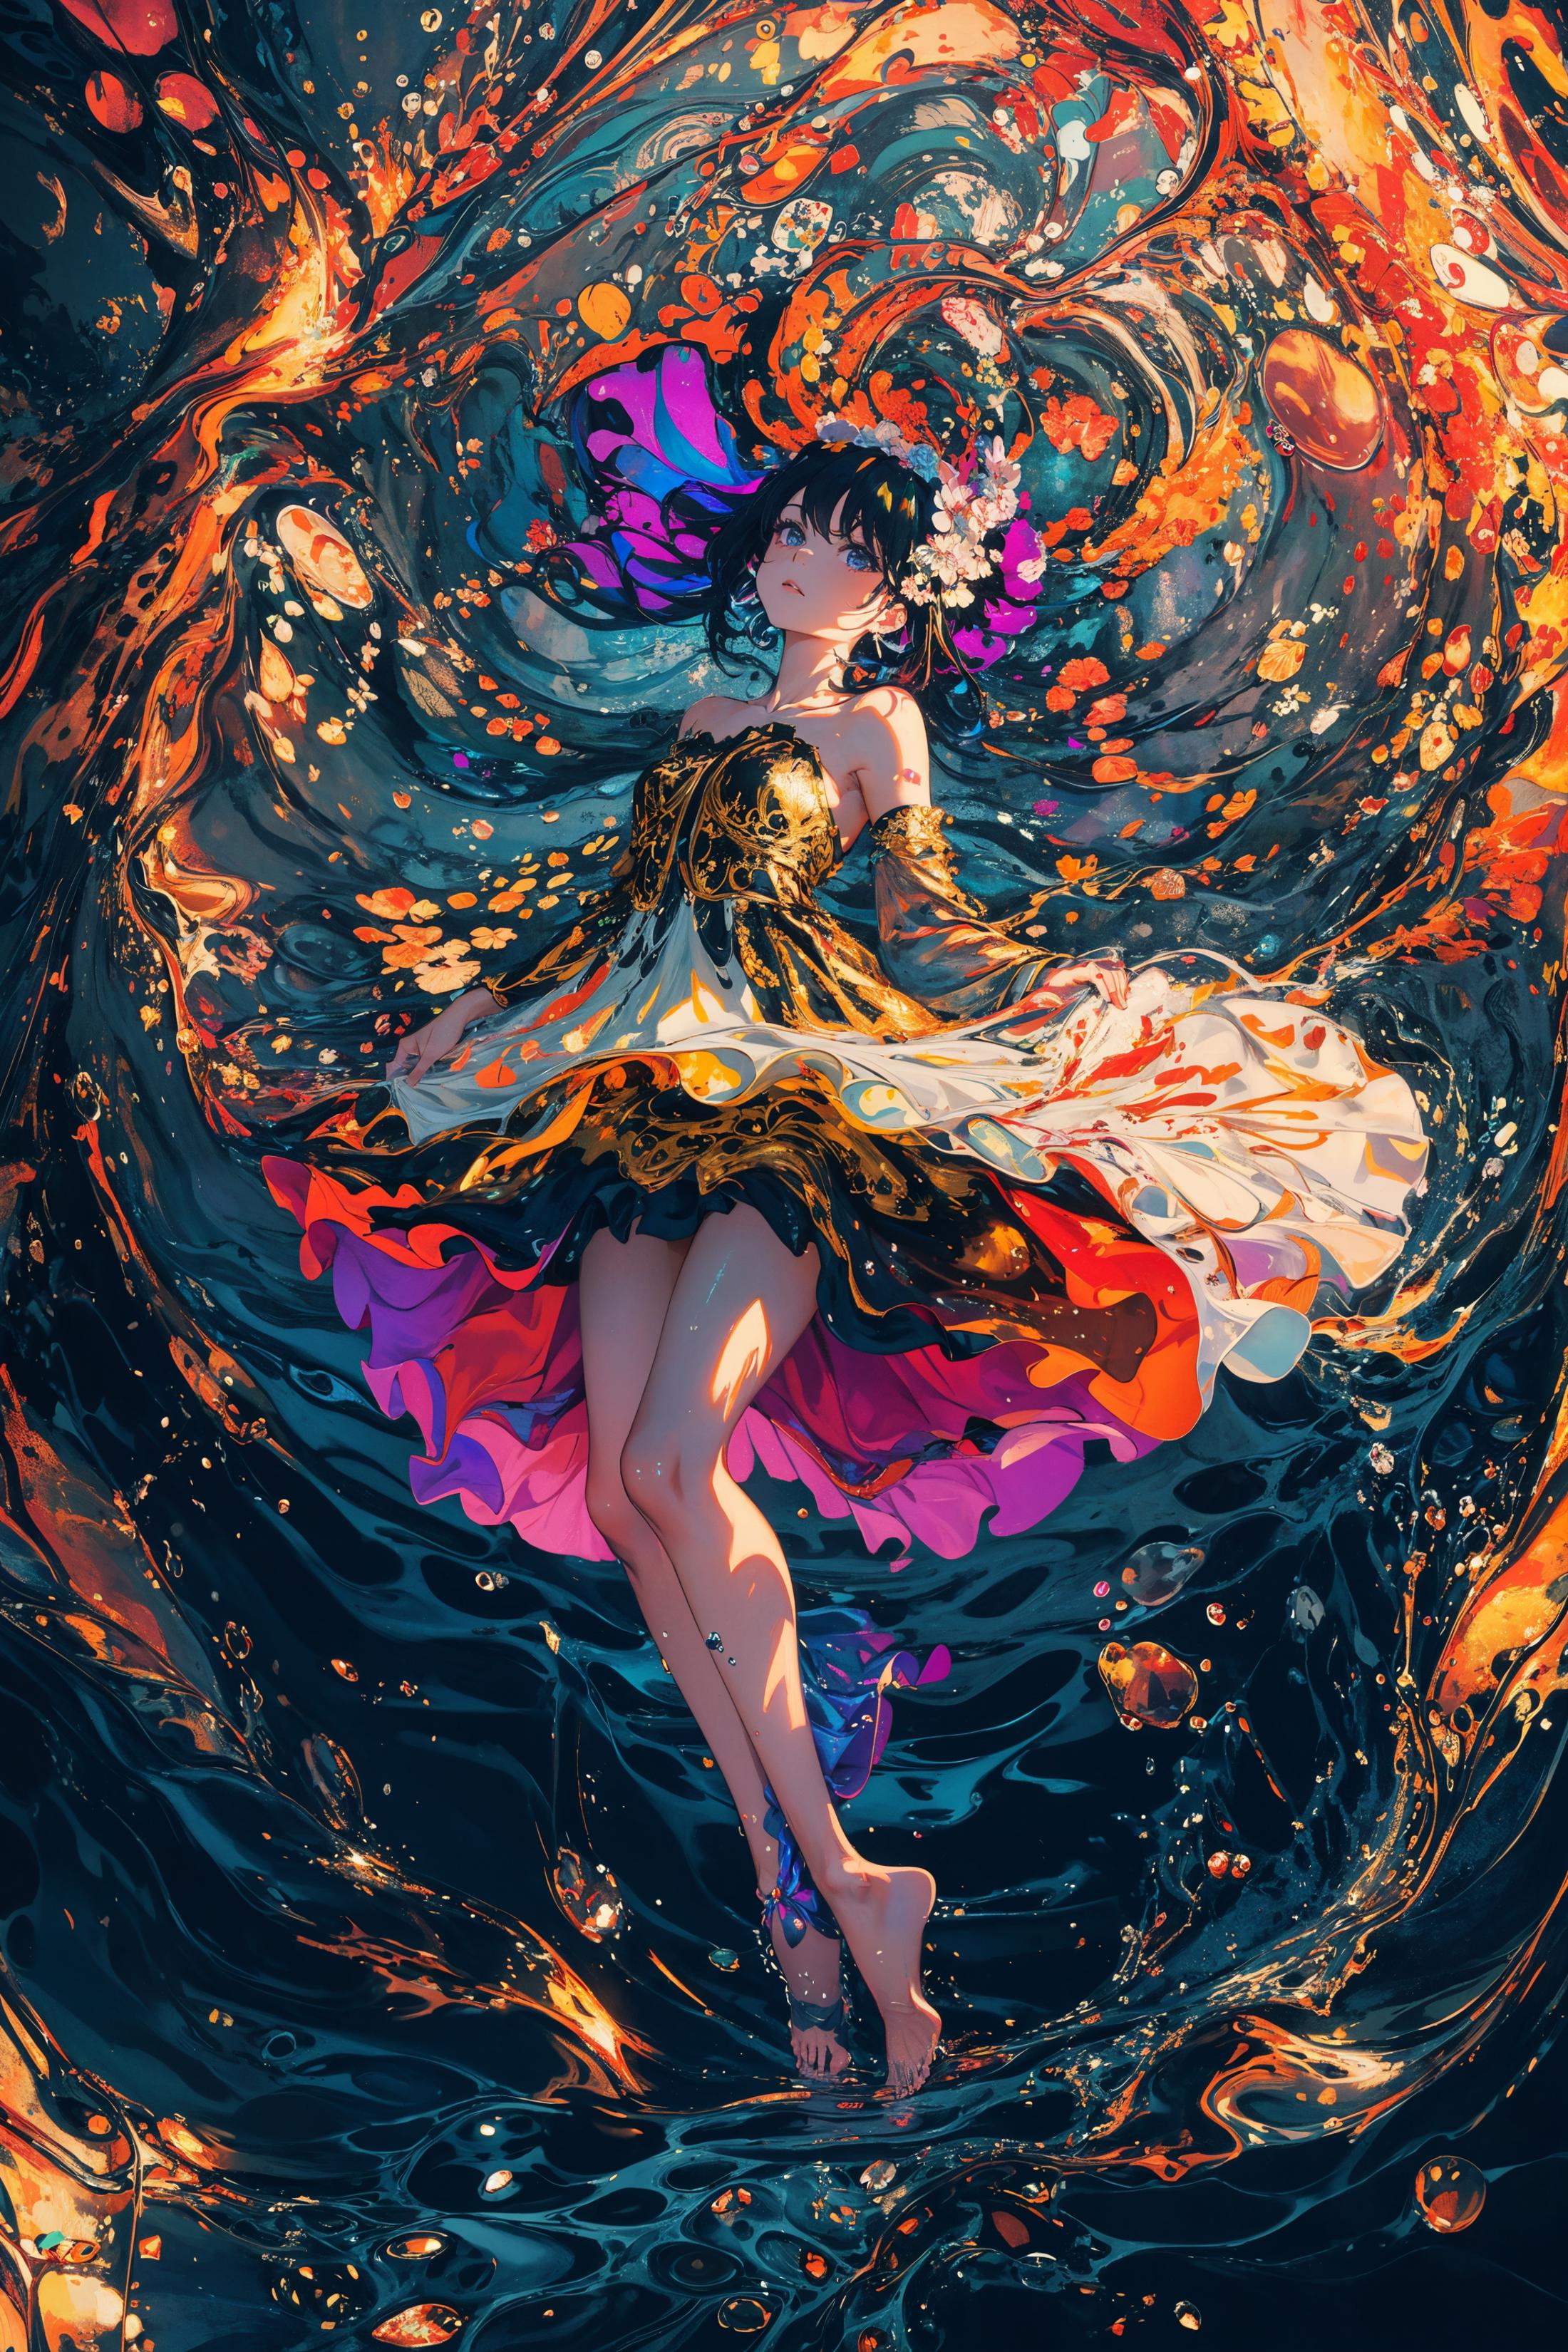 Anime-style artwork of a woman in a flowing dress surrounded by swirling colors and bubbles.